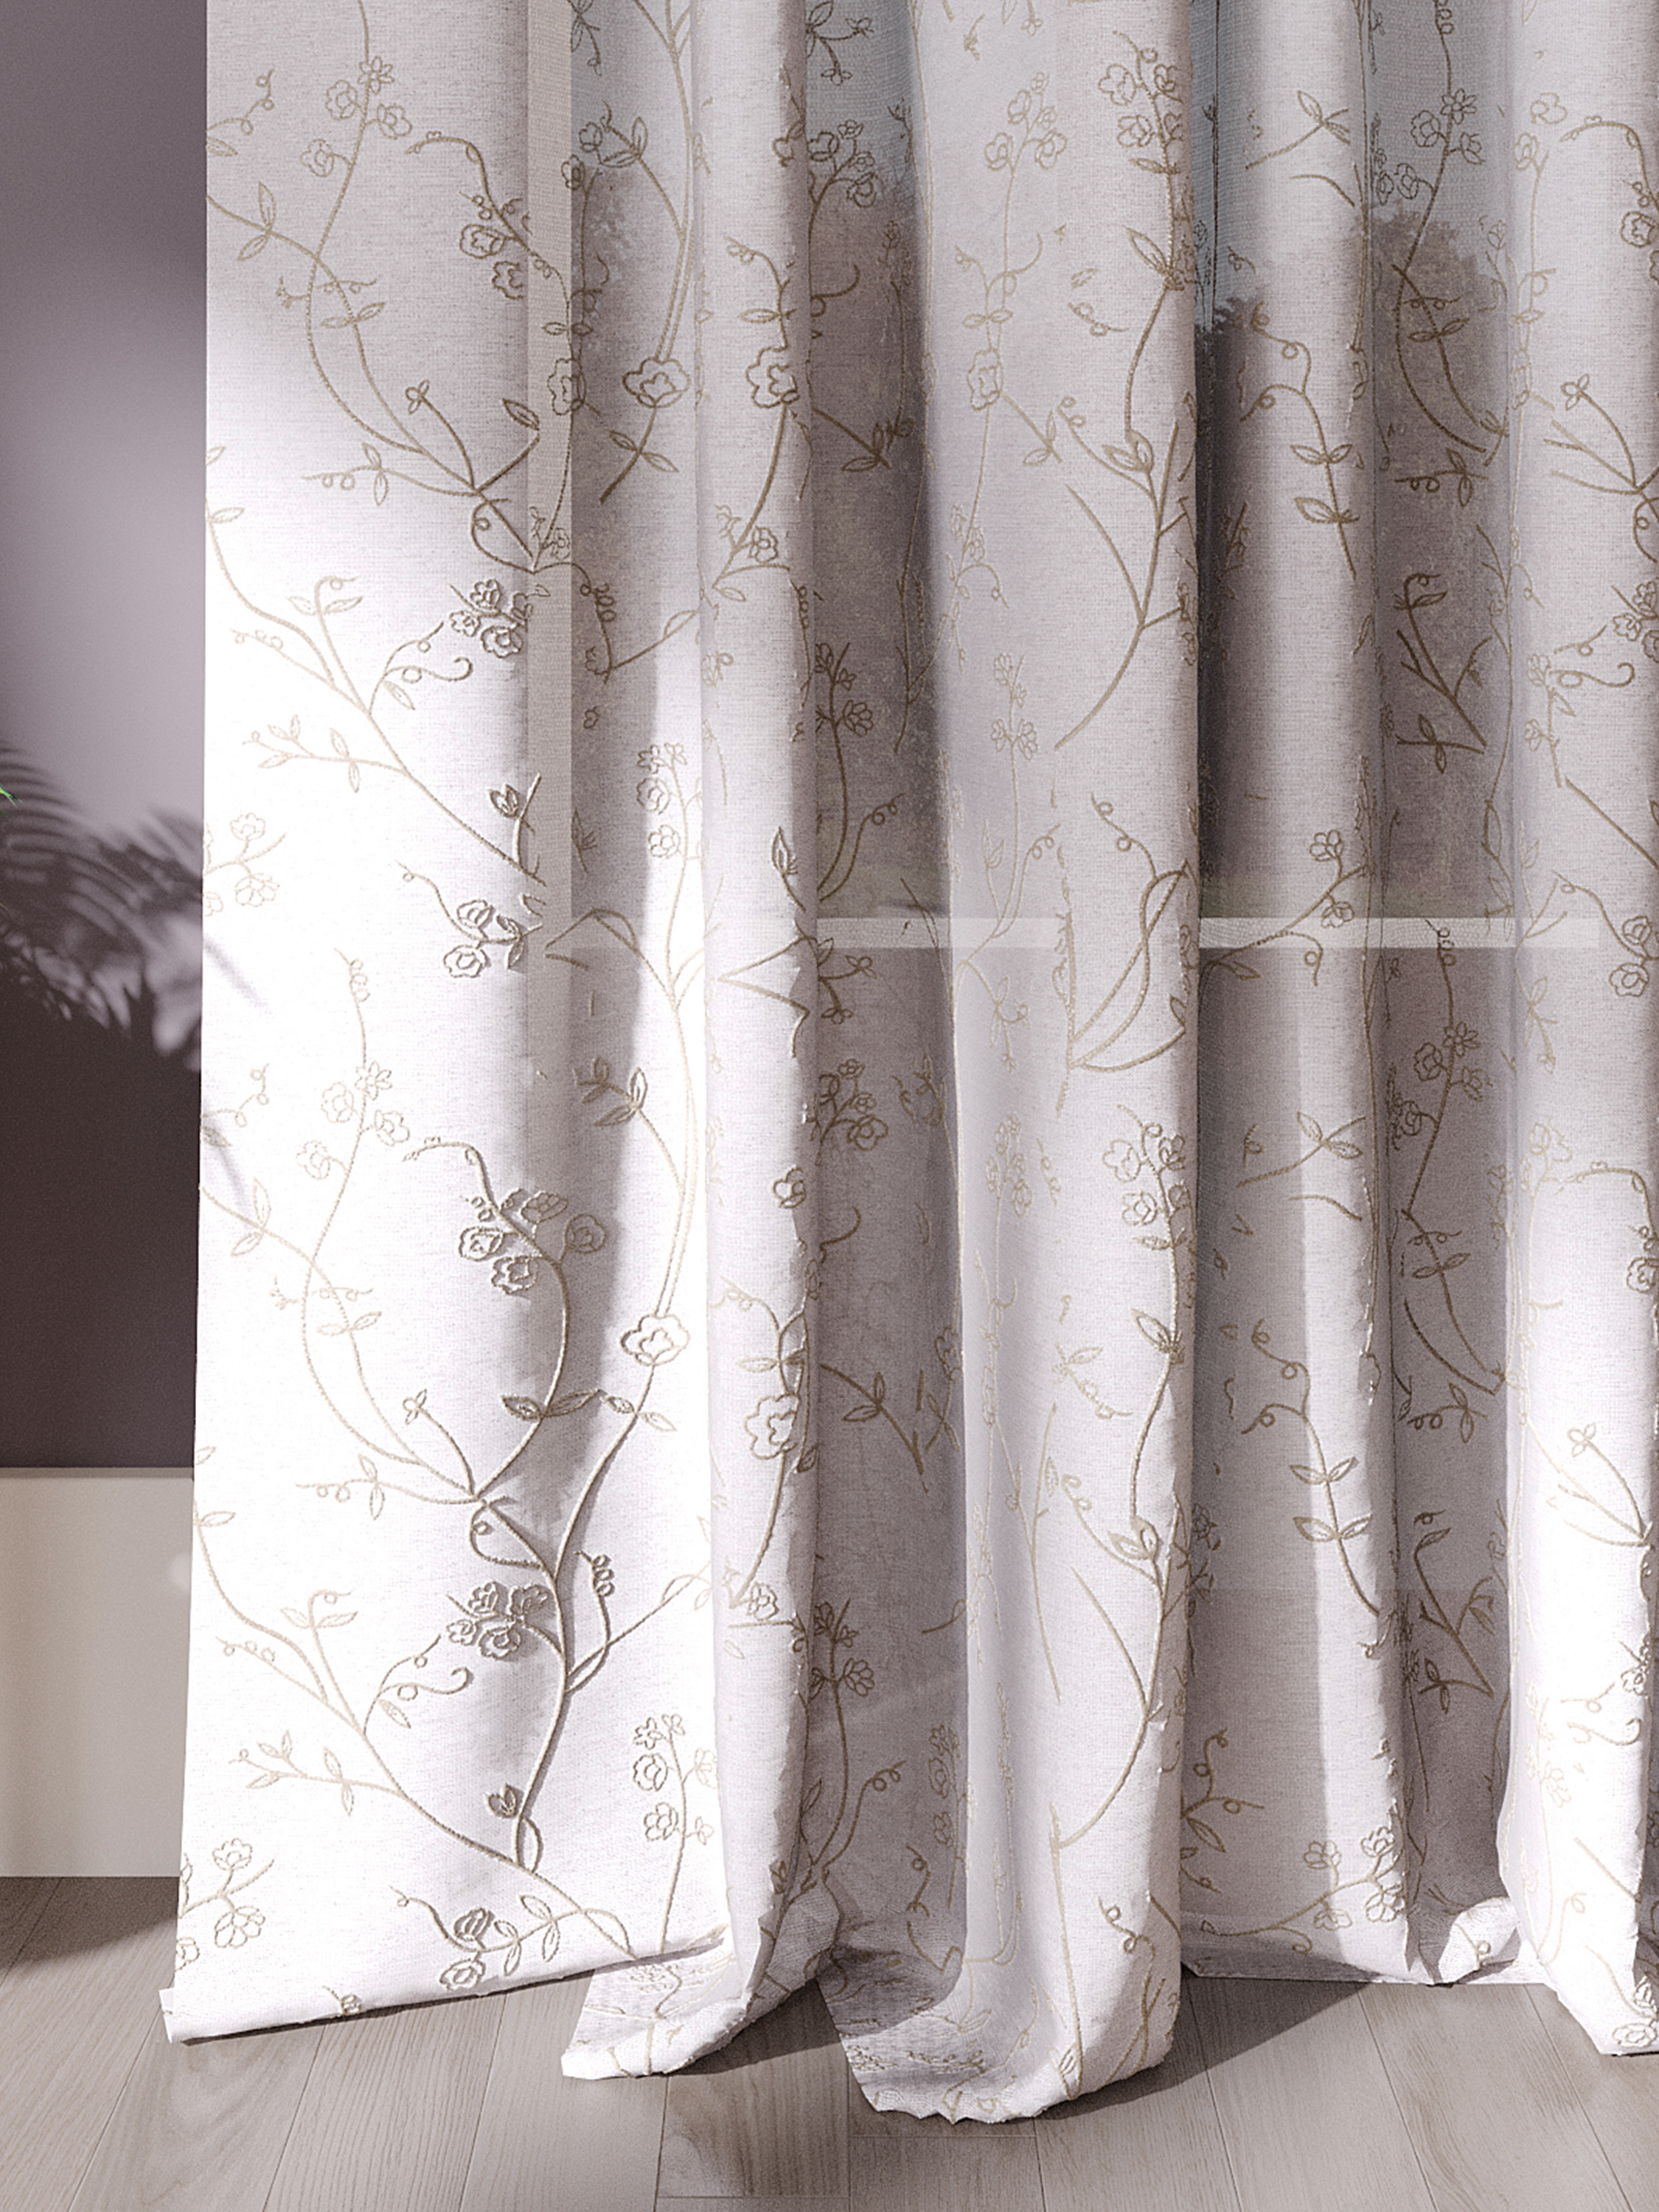 Delicately Curatedbotanical pattern Tendril tailormade designer curtains